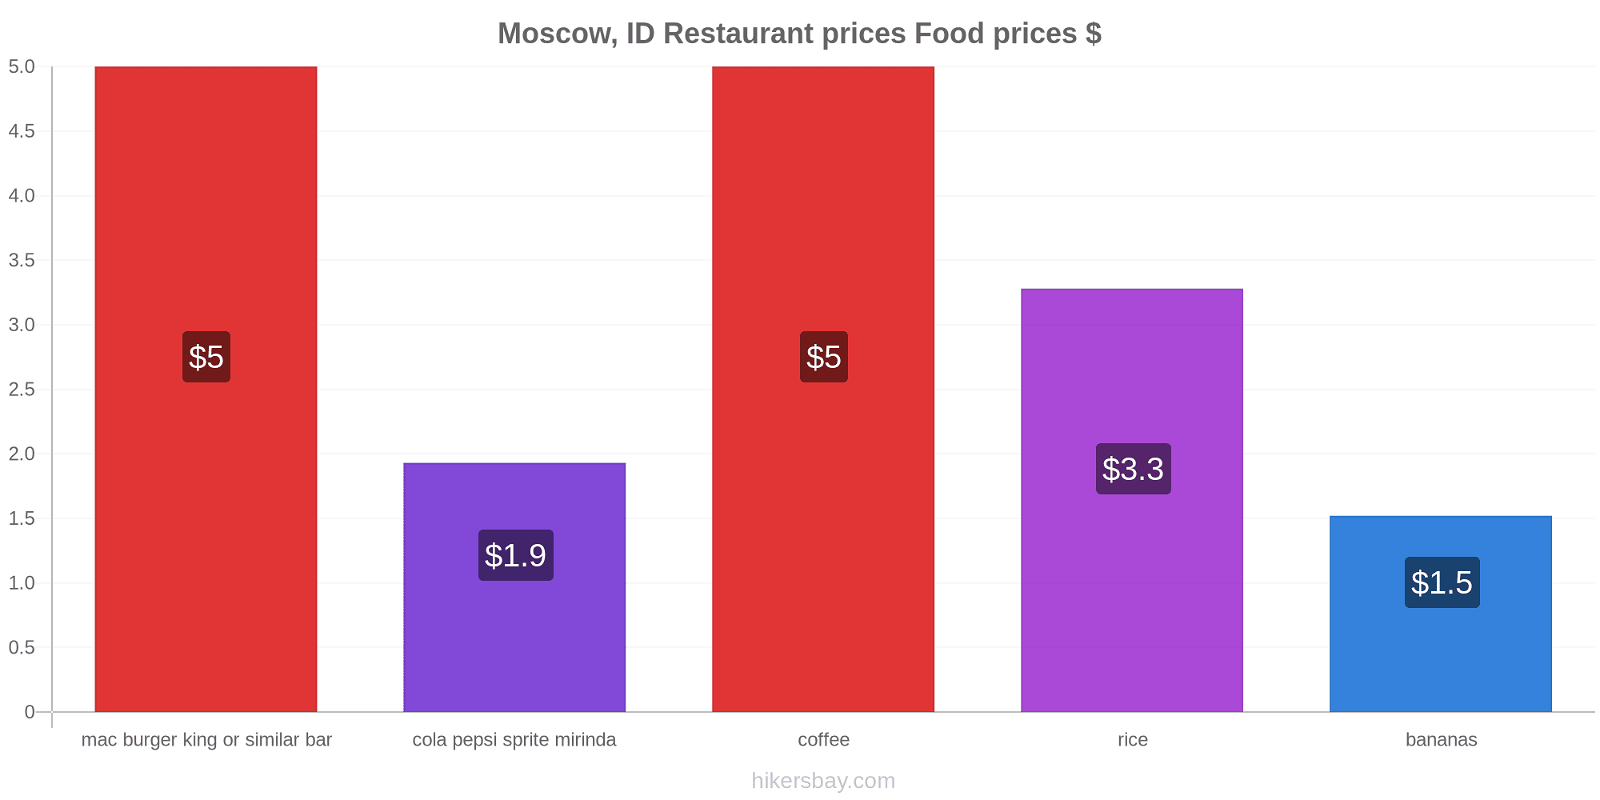 Moscow, ID price changes hikersbay.com